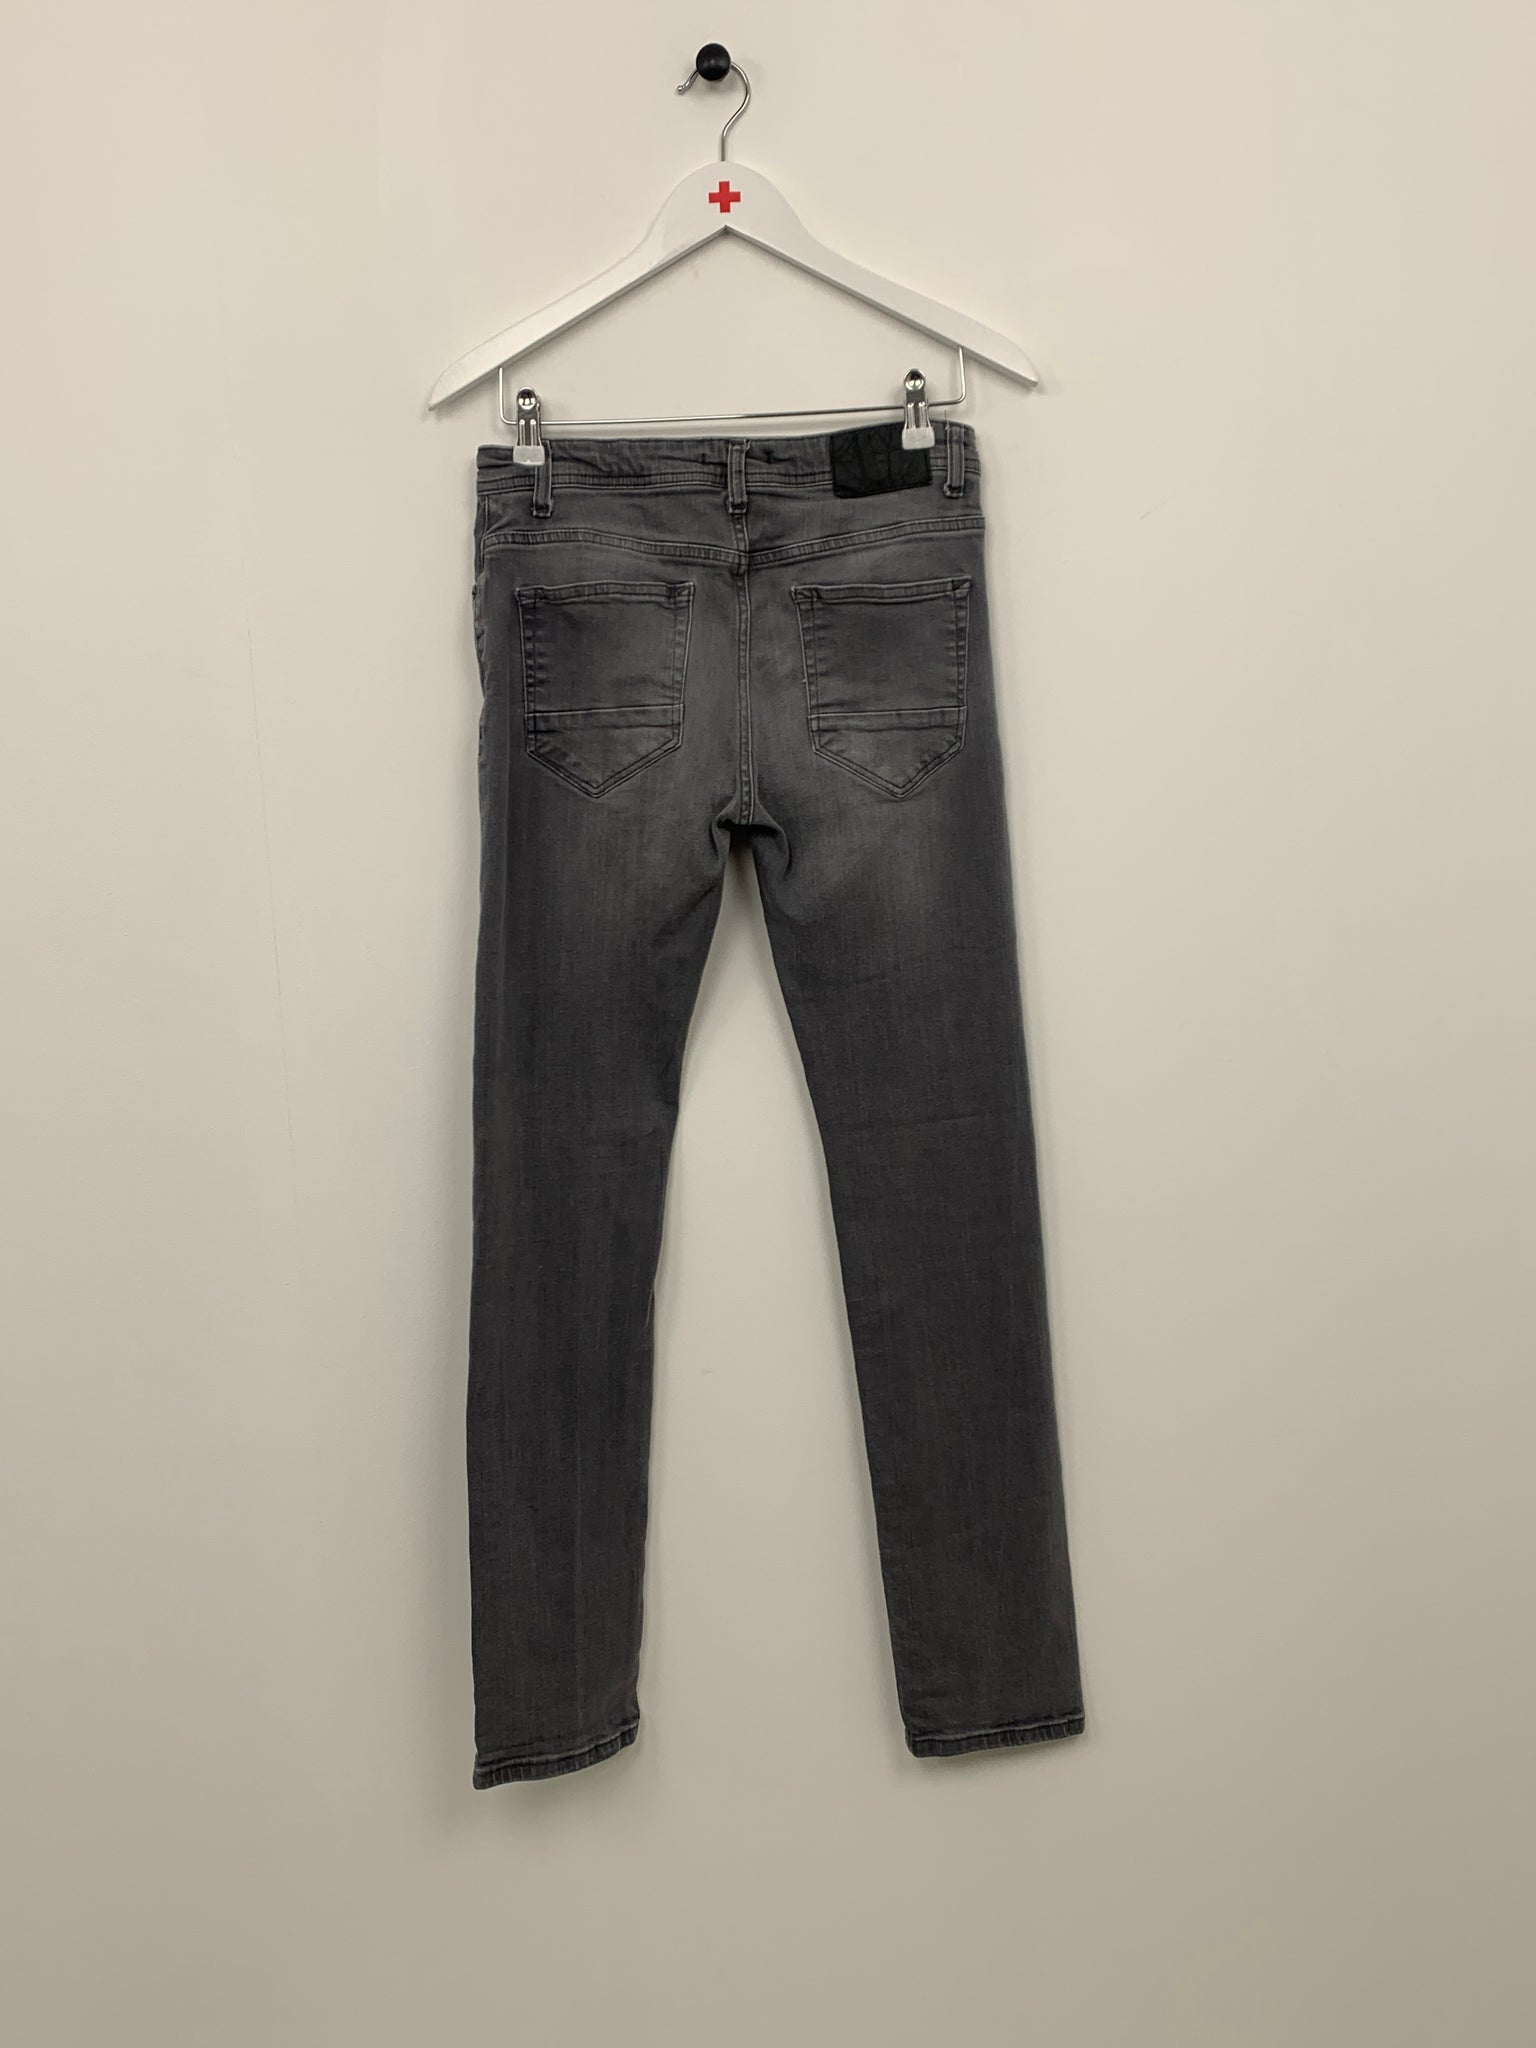 Pier one Jeans